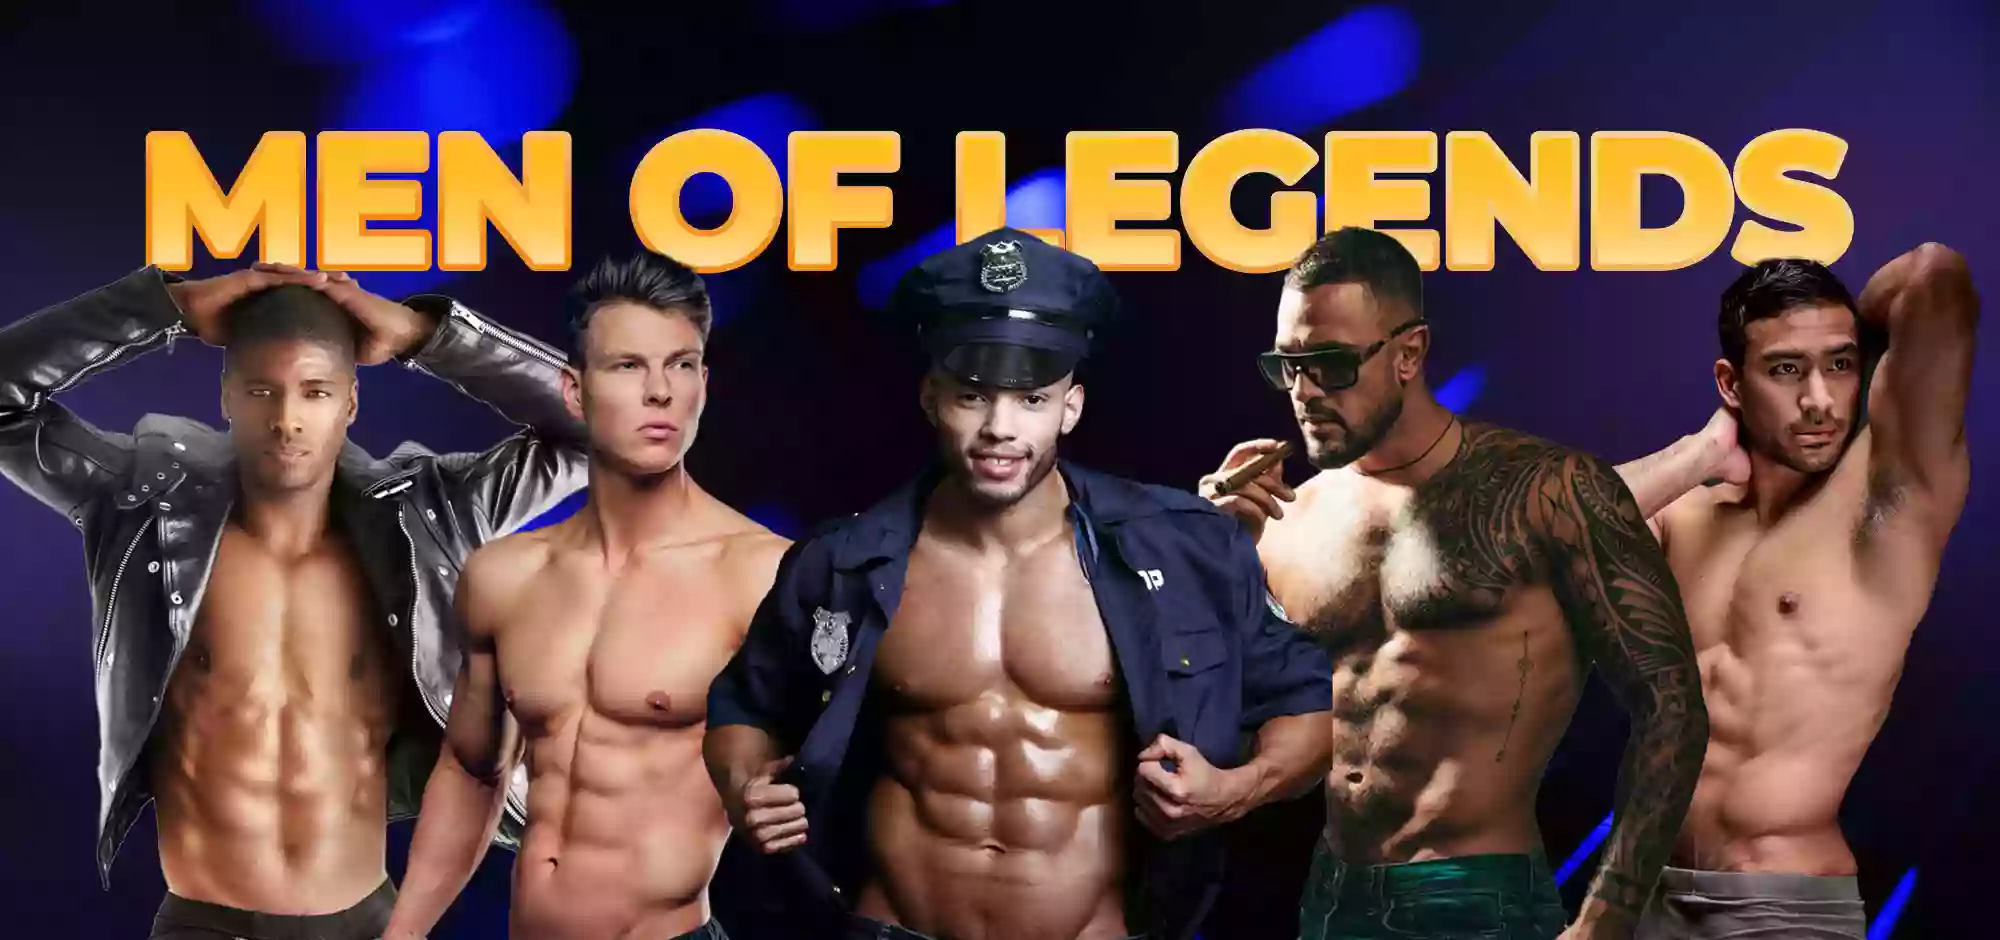 Men of Legends | Male Strip Club NYC with Best Male Strippers NYC